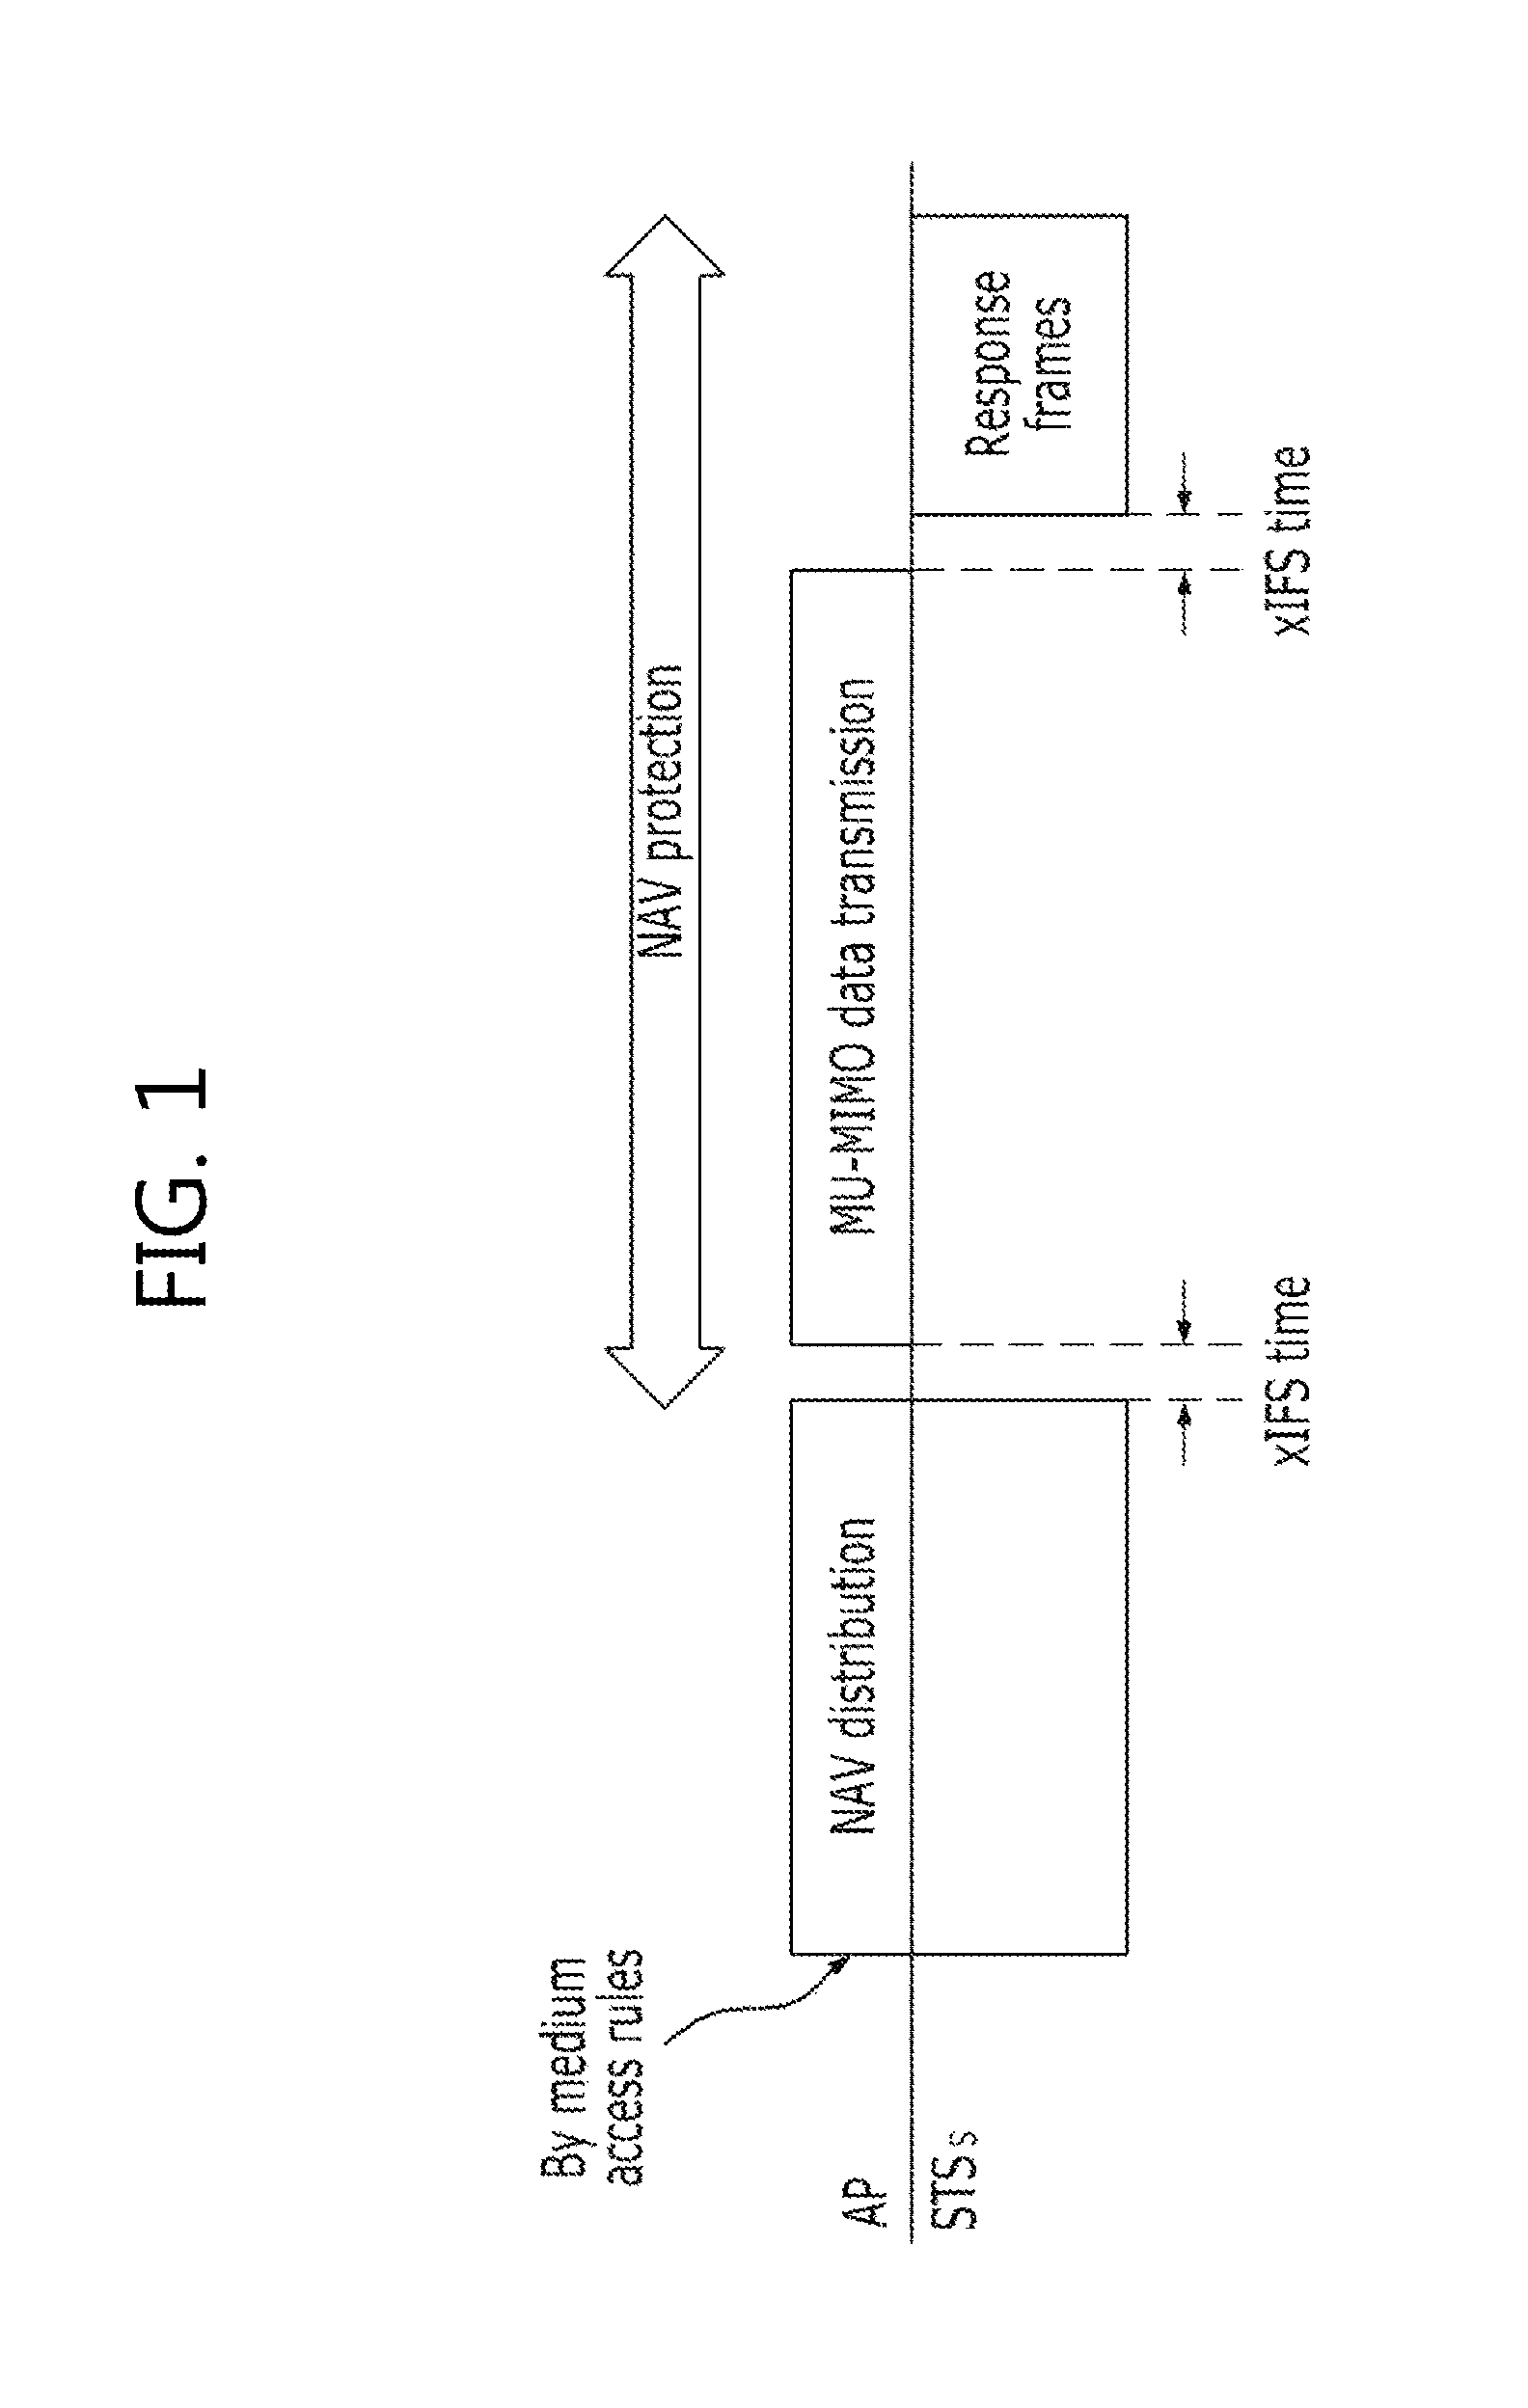 Method for protecting data in a MU-MIMO based wireless communication system